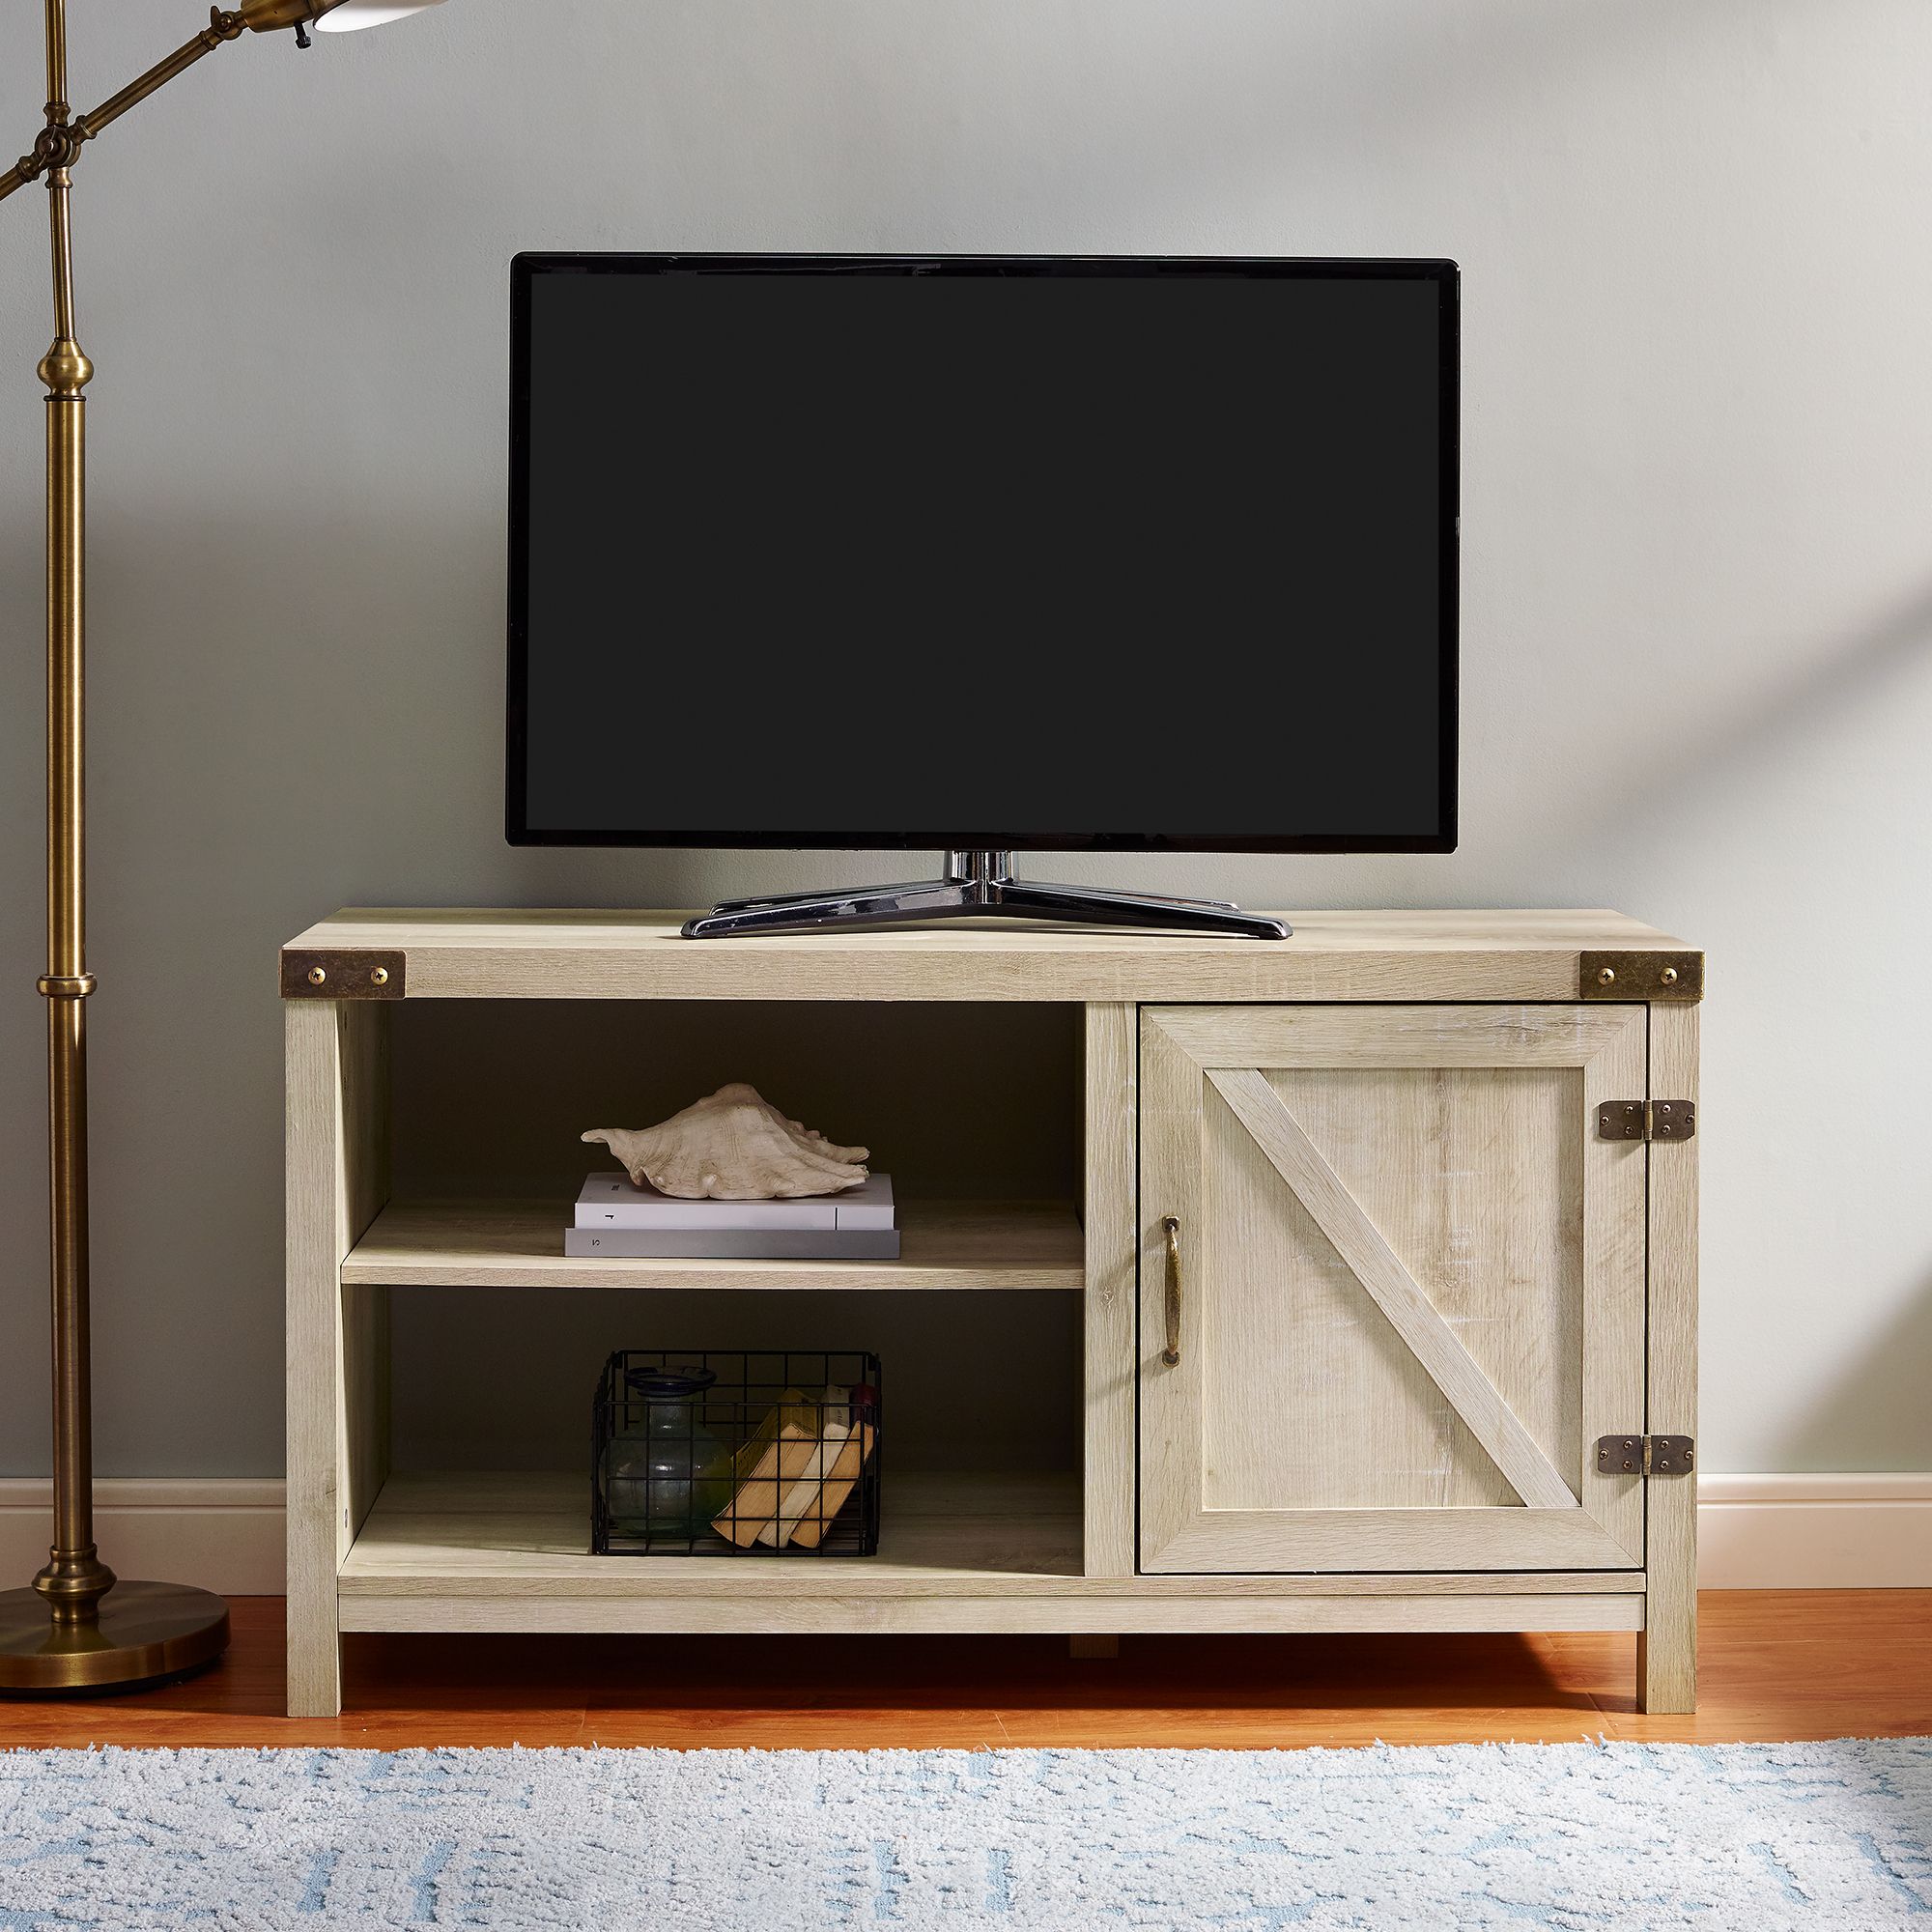 Woven Paths Farmhouse Barn Door Tv Stand For Tvs Up To 50 Regarding Tv Stands For Tvs Up To 50" (View 6 of 20)